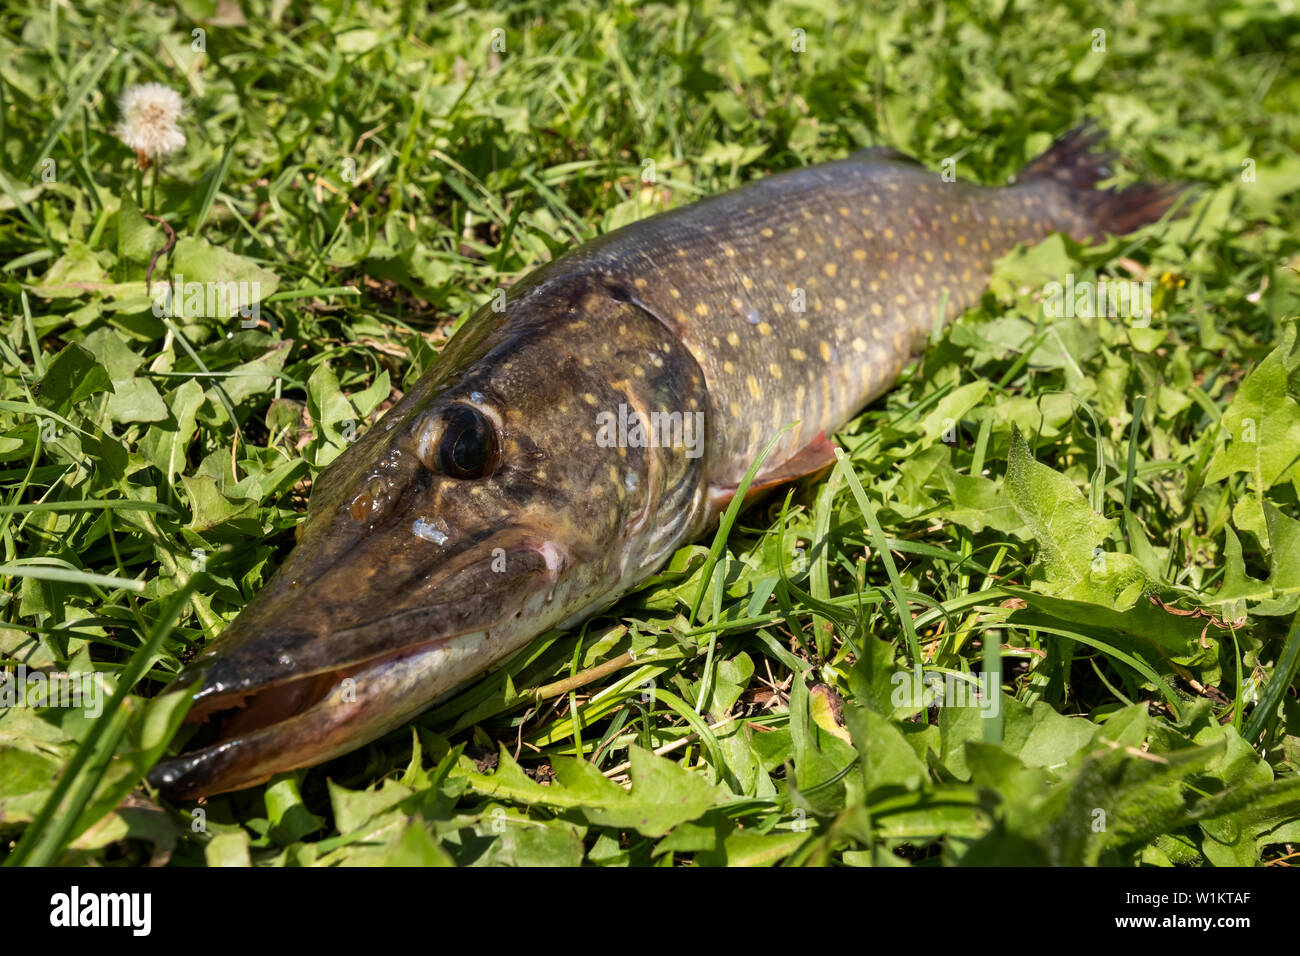 Description: Fisherman trophy. Freshwater fish pike lying on the green grass Stock Photo